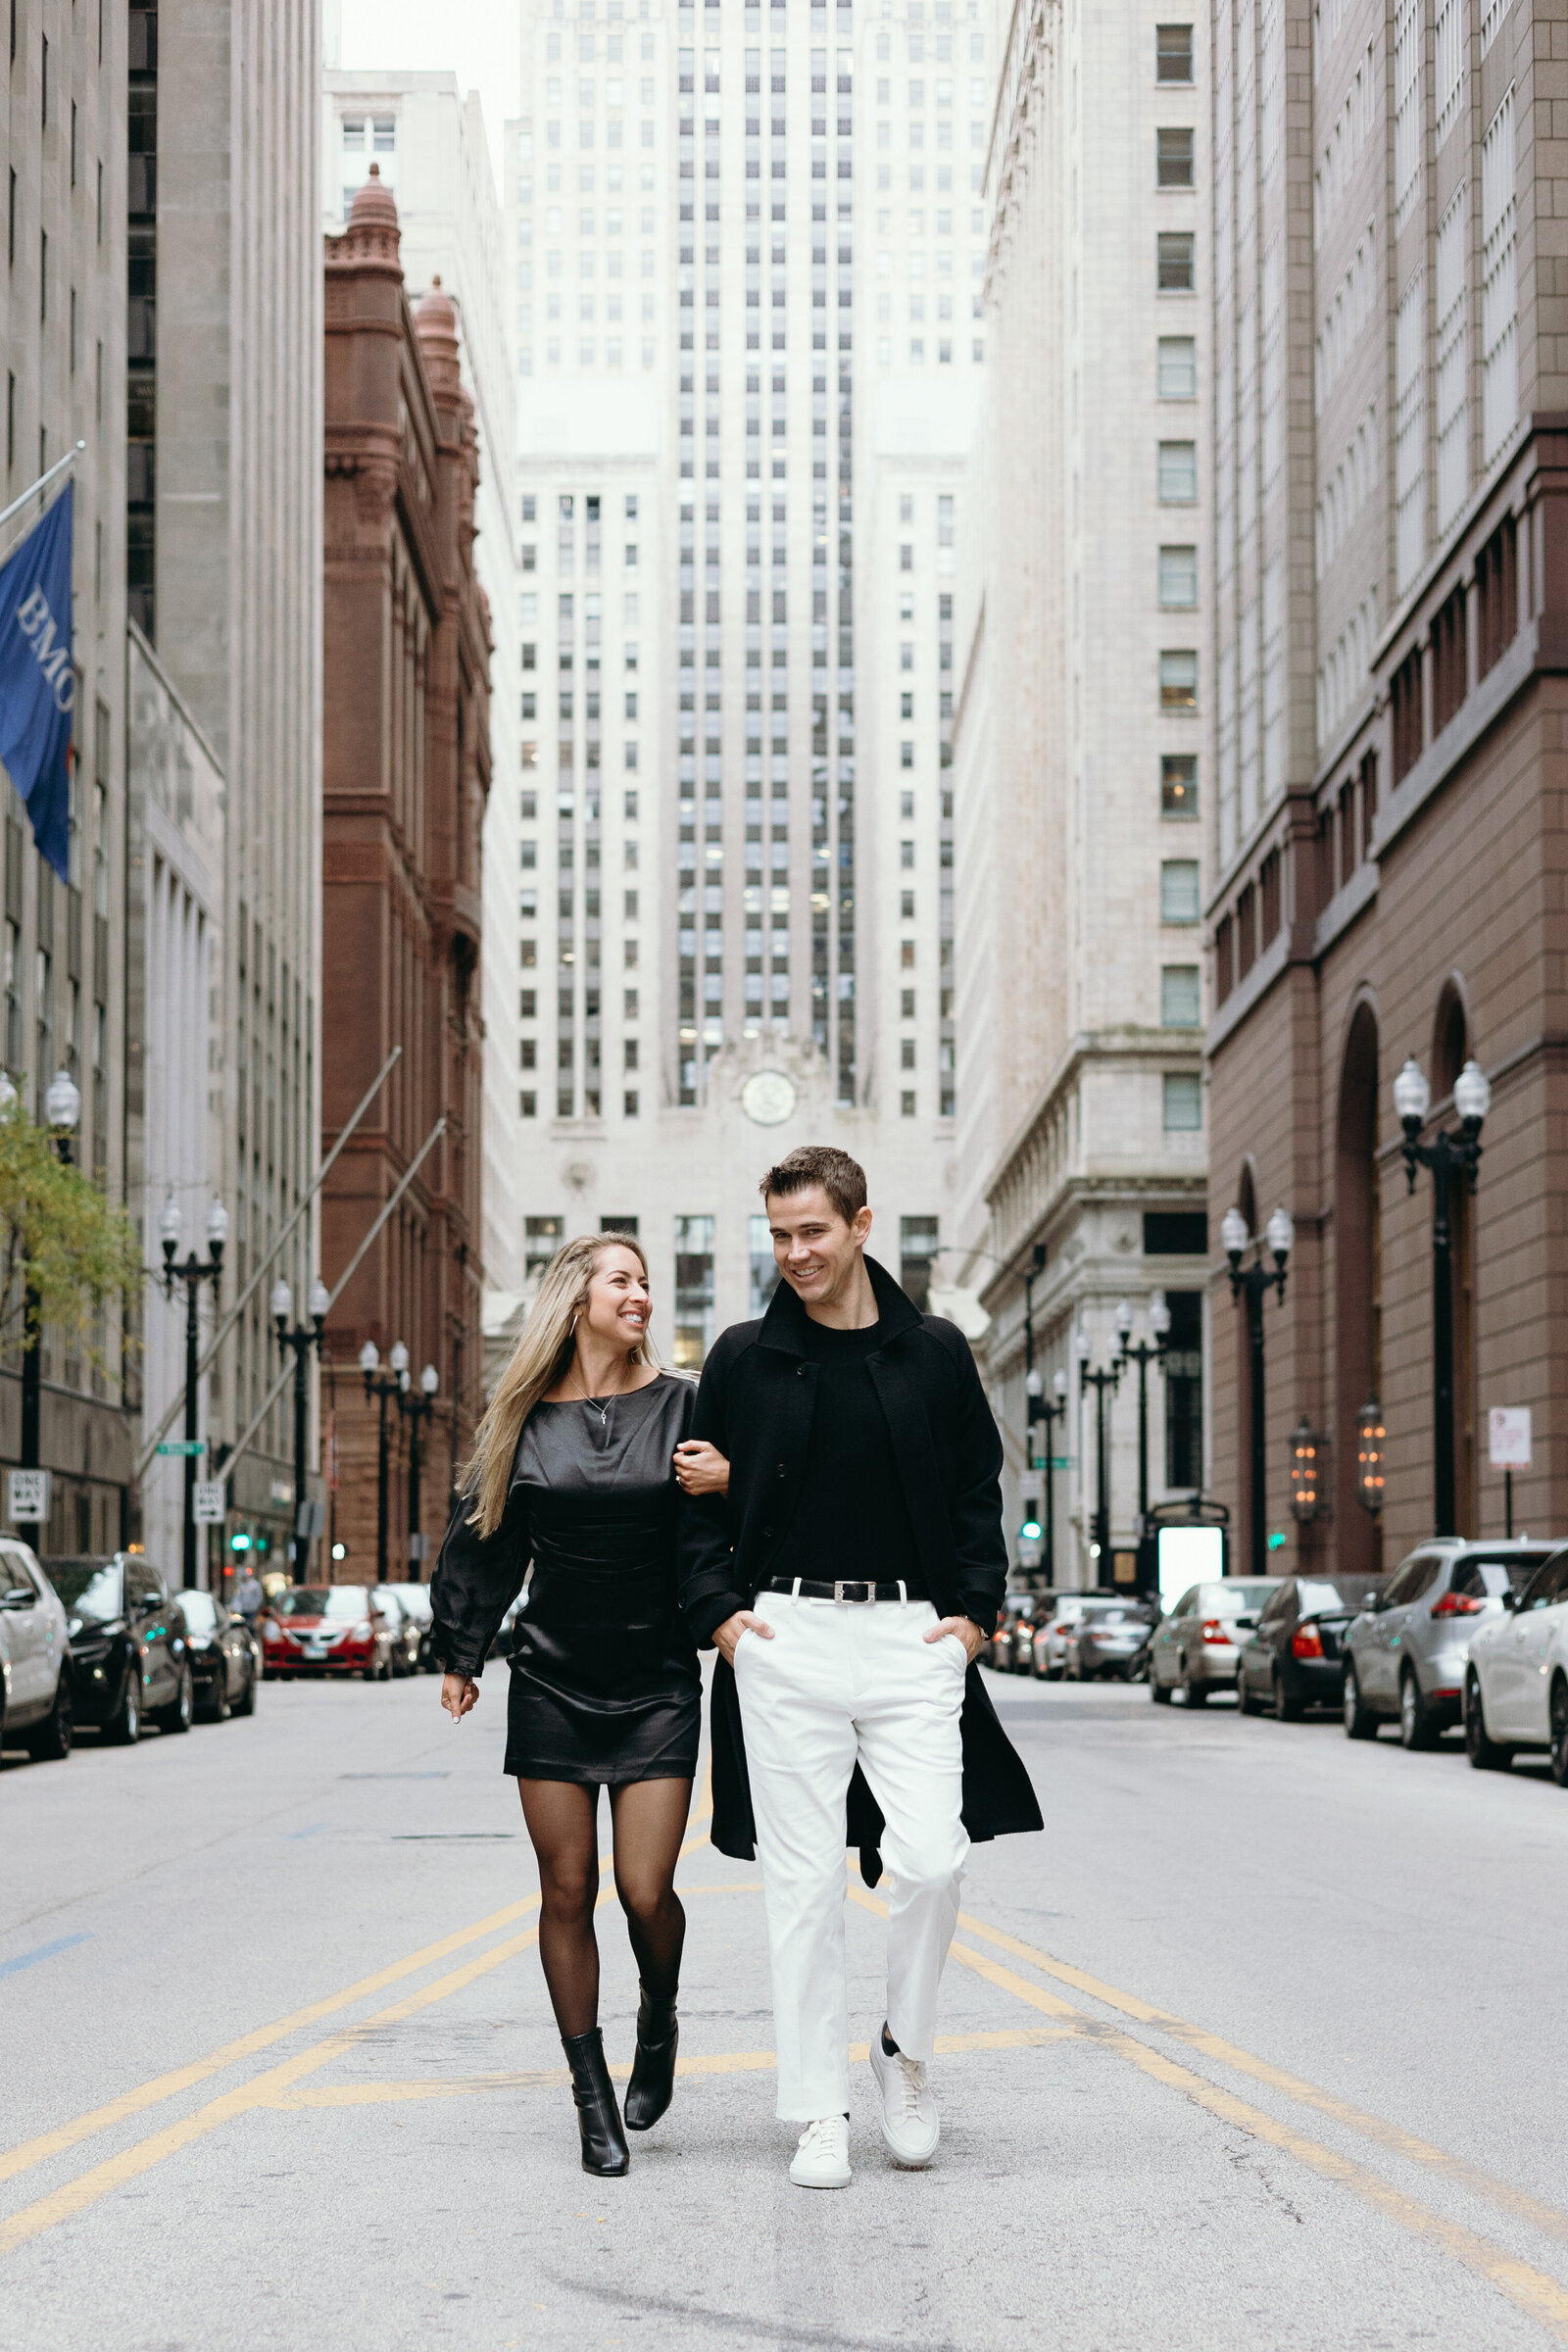 Z Photo and Film - Cody and Silvana's Chicago Engagement Shoot - Chicago, Illinois-59